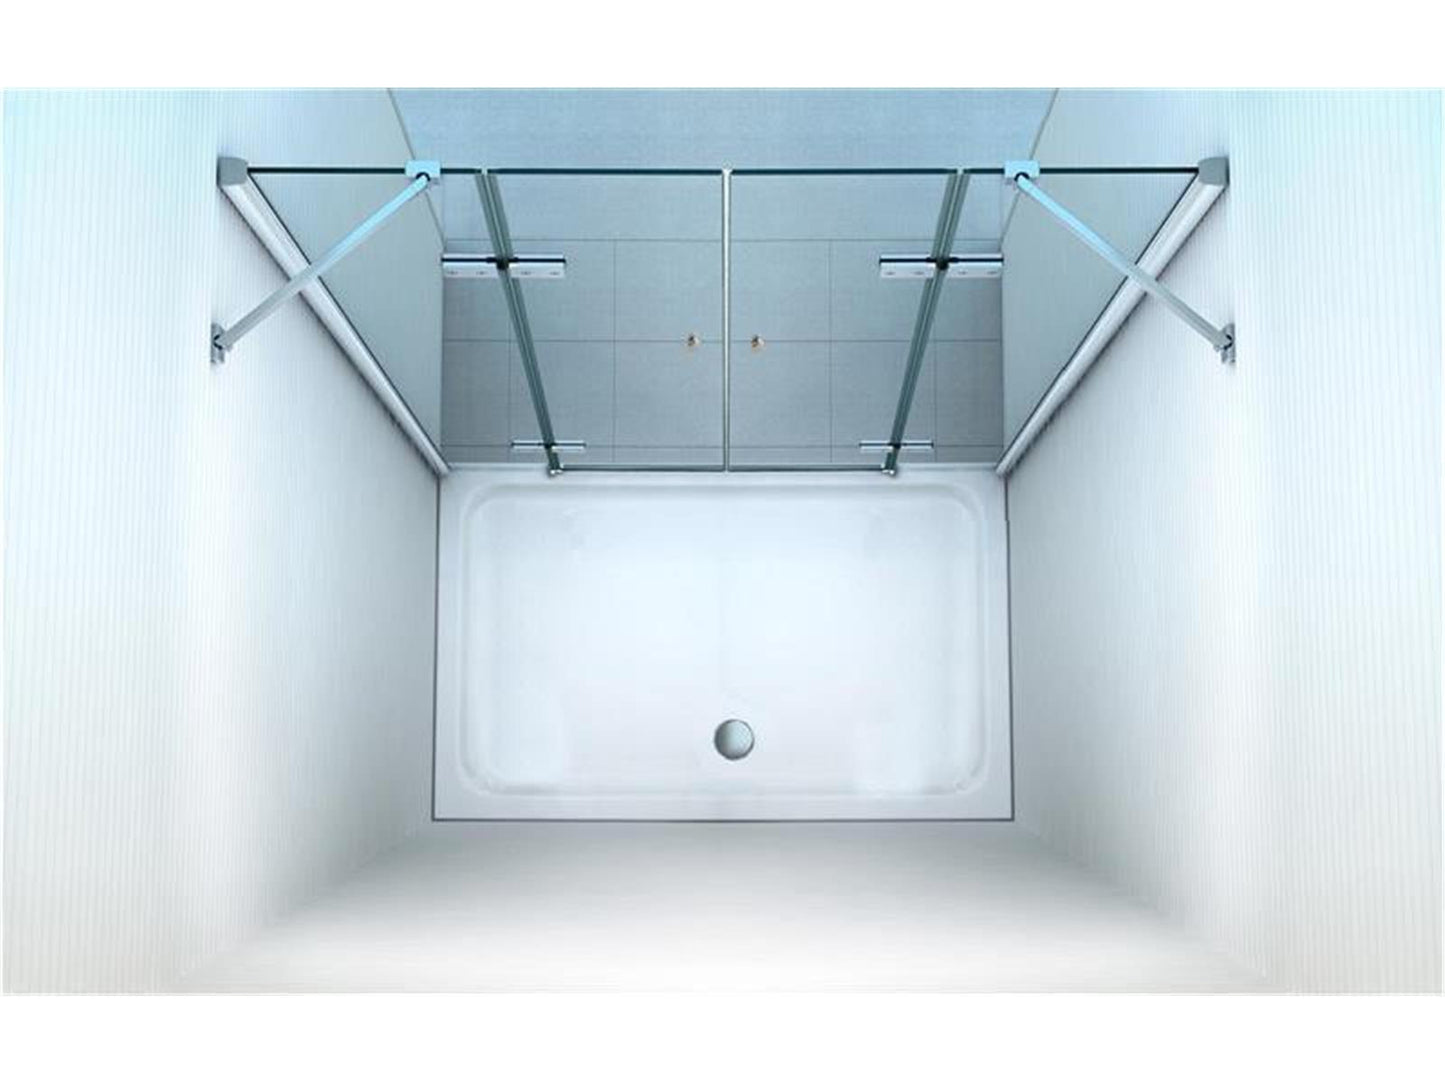 GlasHomeCenter - Utah niche cabin (175 x 195 cm) - 8mm toughened safety glass - without shower tray